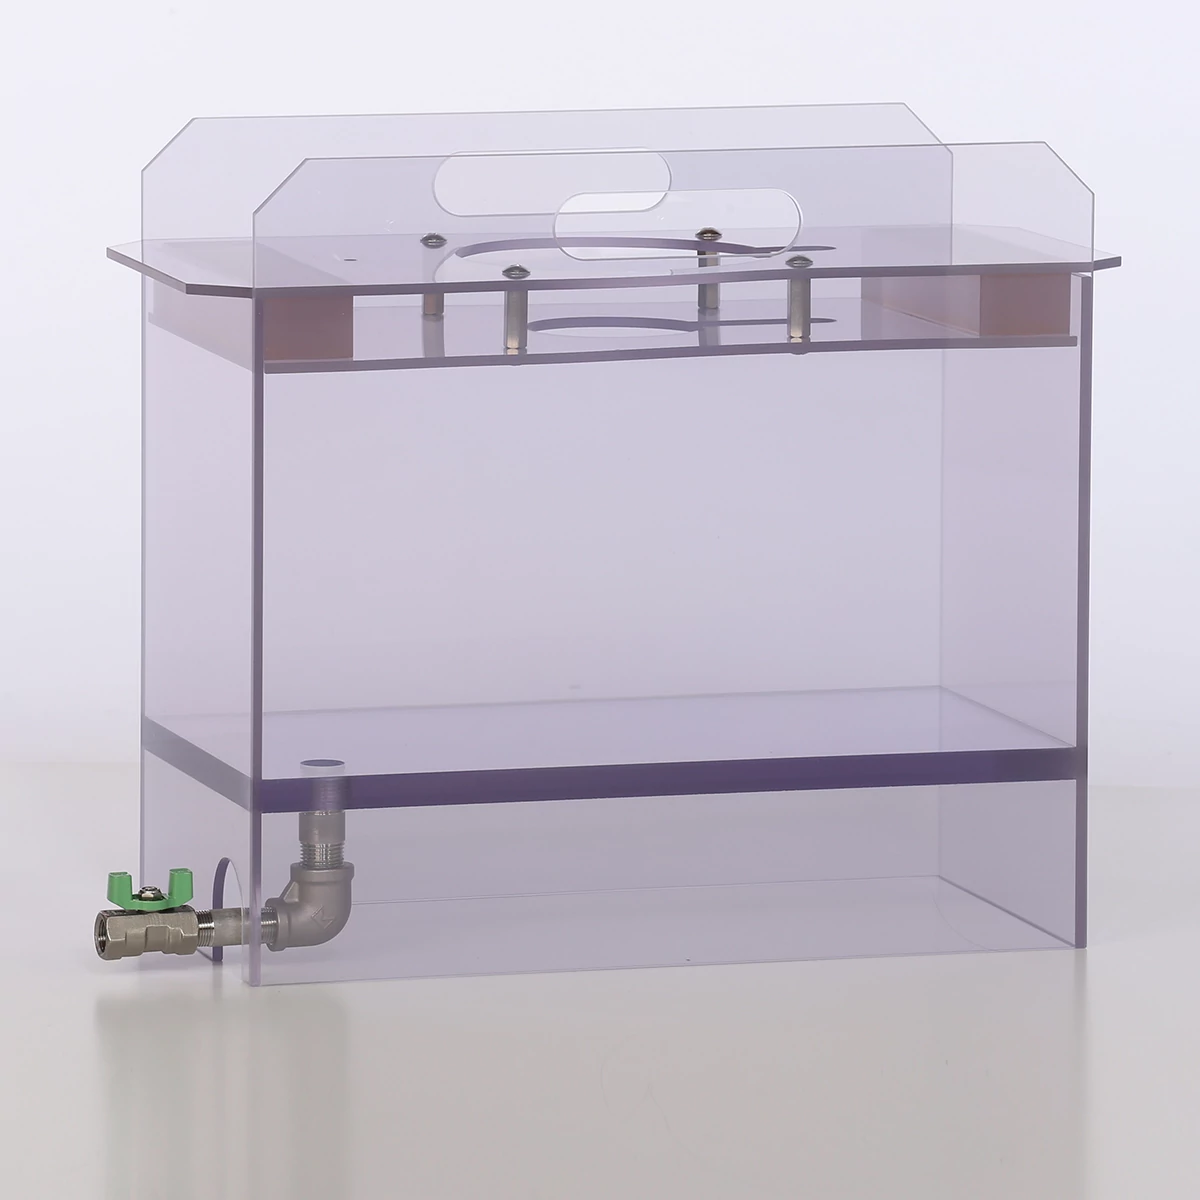 microstar research water tank from clear pvc